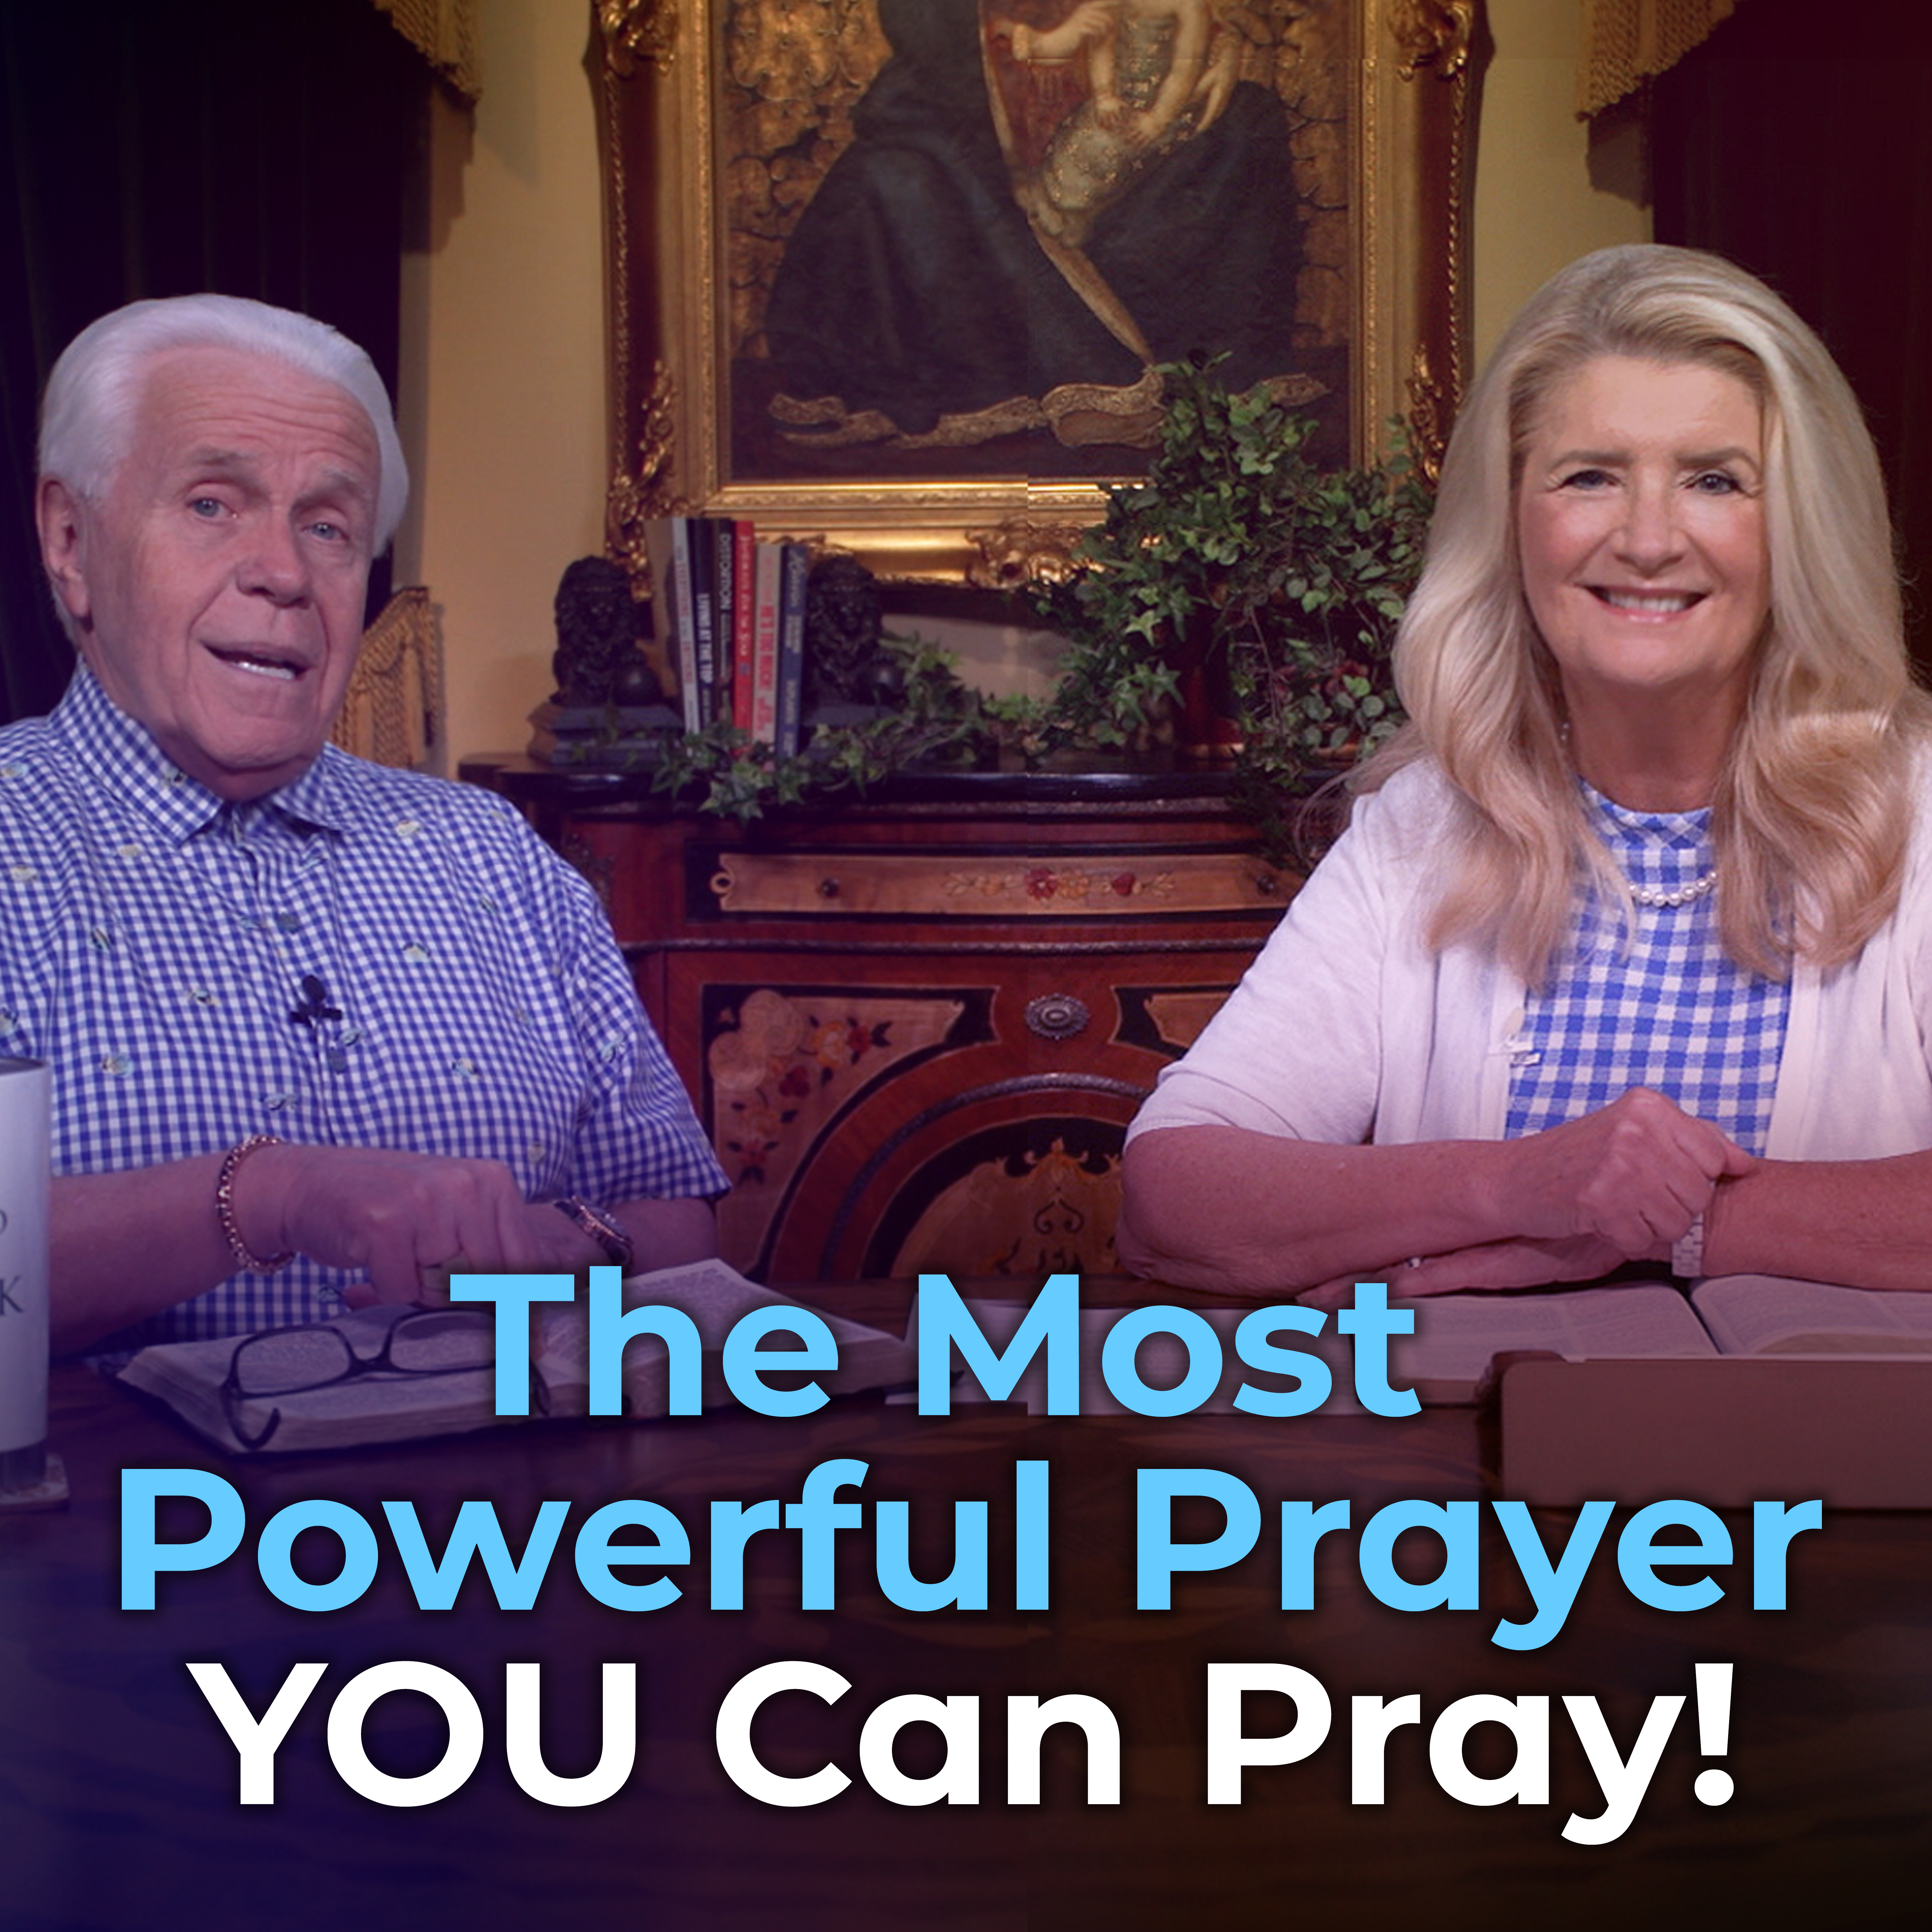 The Most Powerful Prayer You Can Pray!